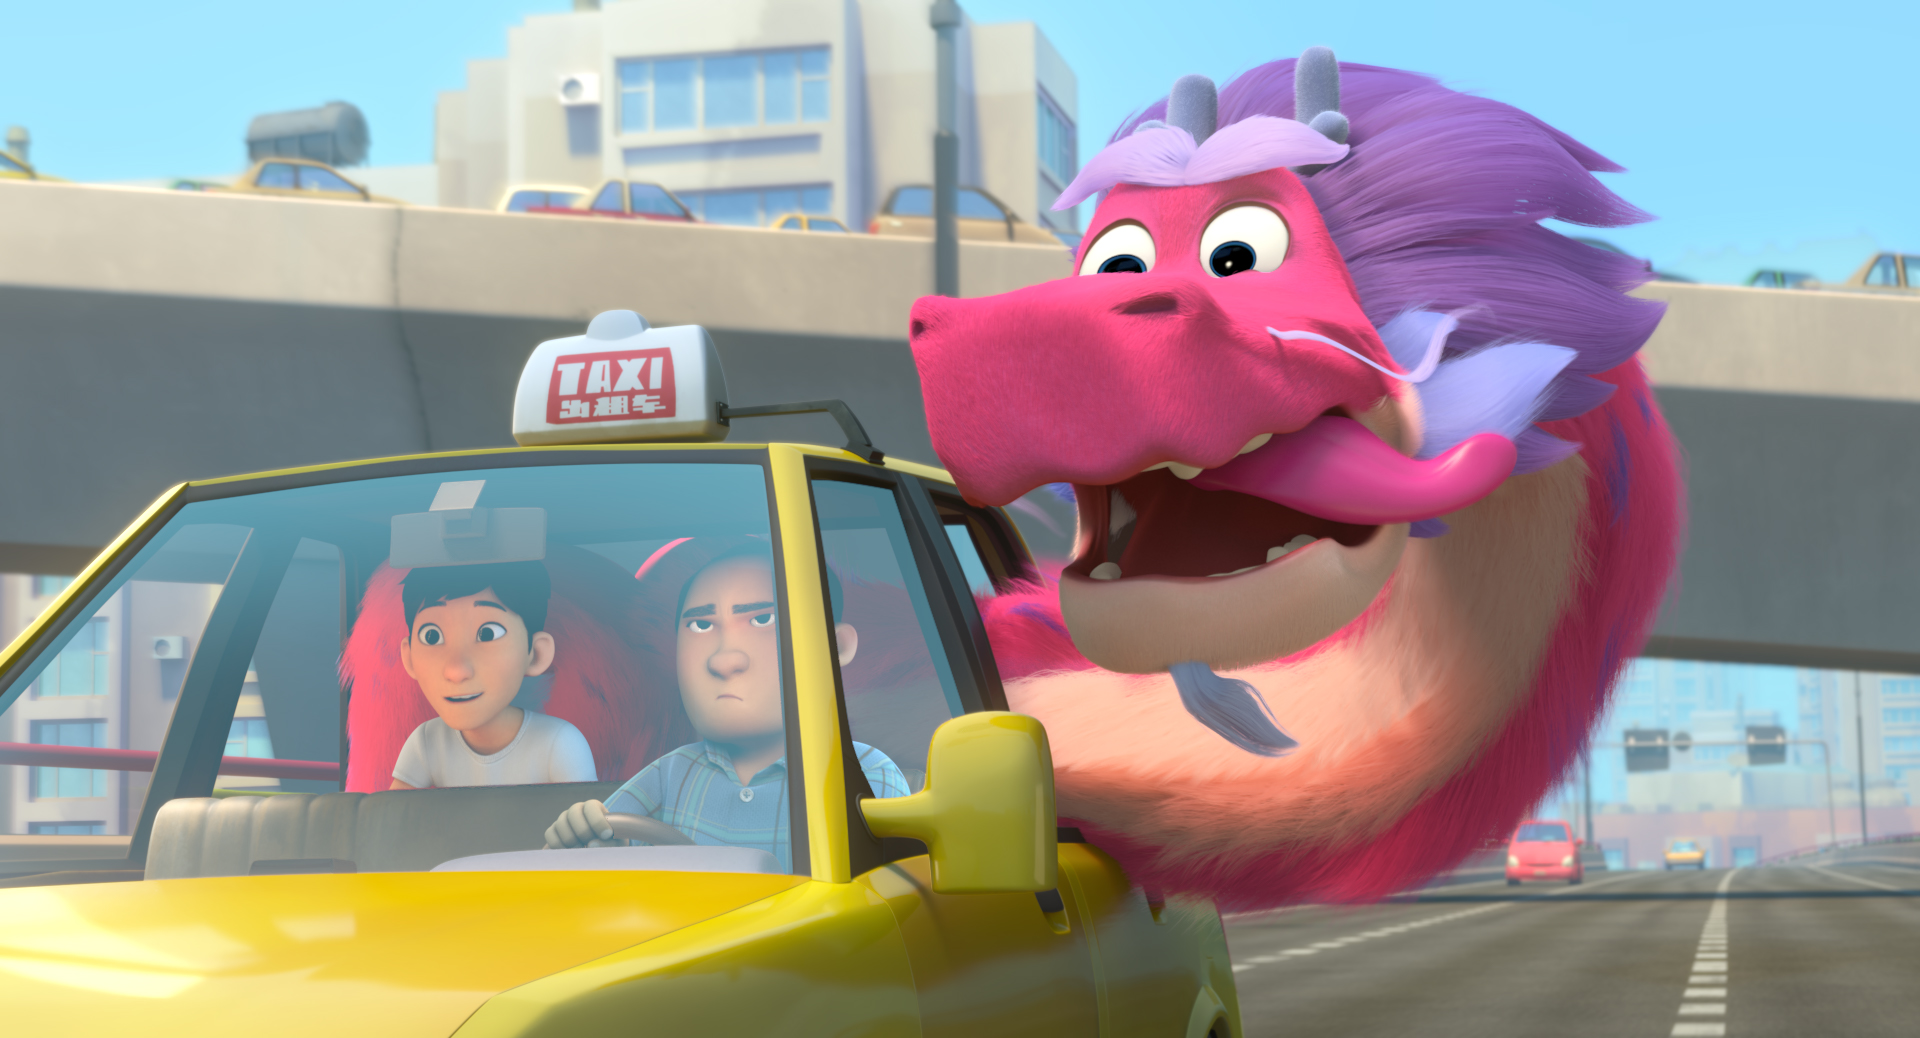 Long the dragon with his head in the wind, sticking out of a cab in Wish Dragon, one of the Best family movies on Netflix